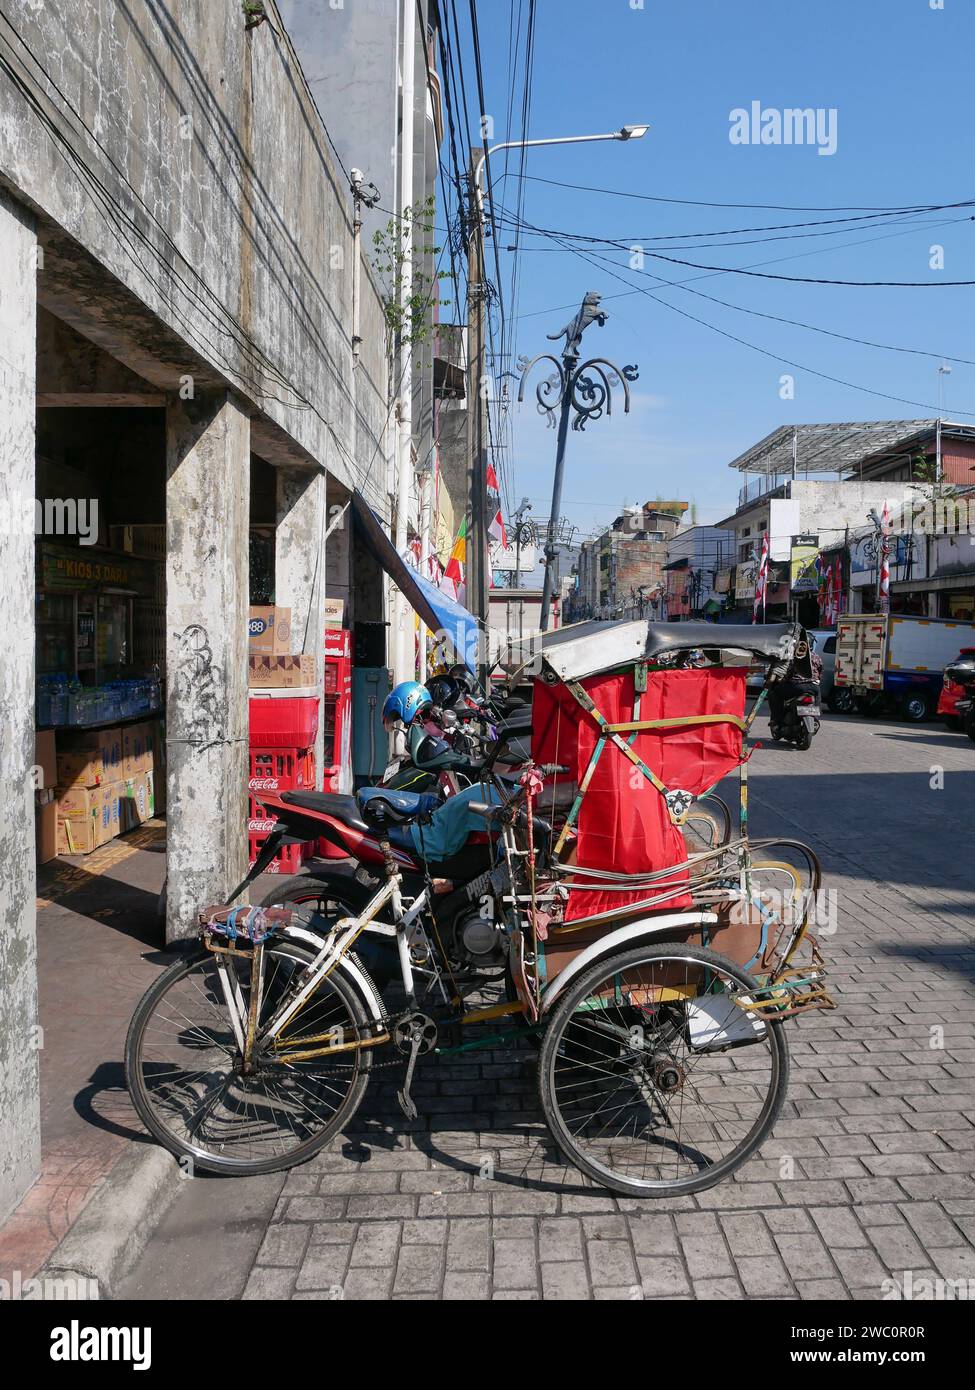 Pedicab or Becak on the roadside in Bandung, West Java, Indonesia. Stock Photo